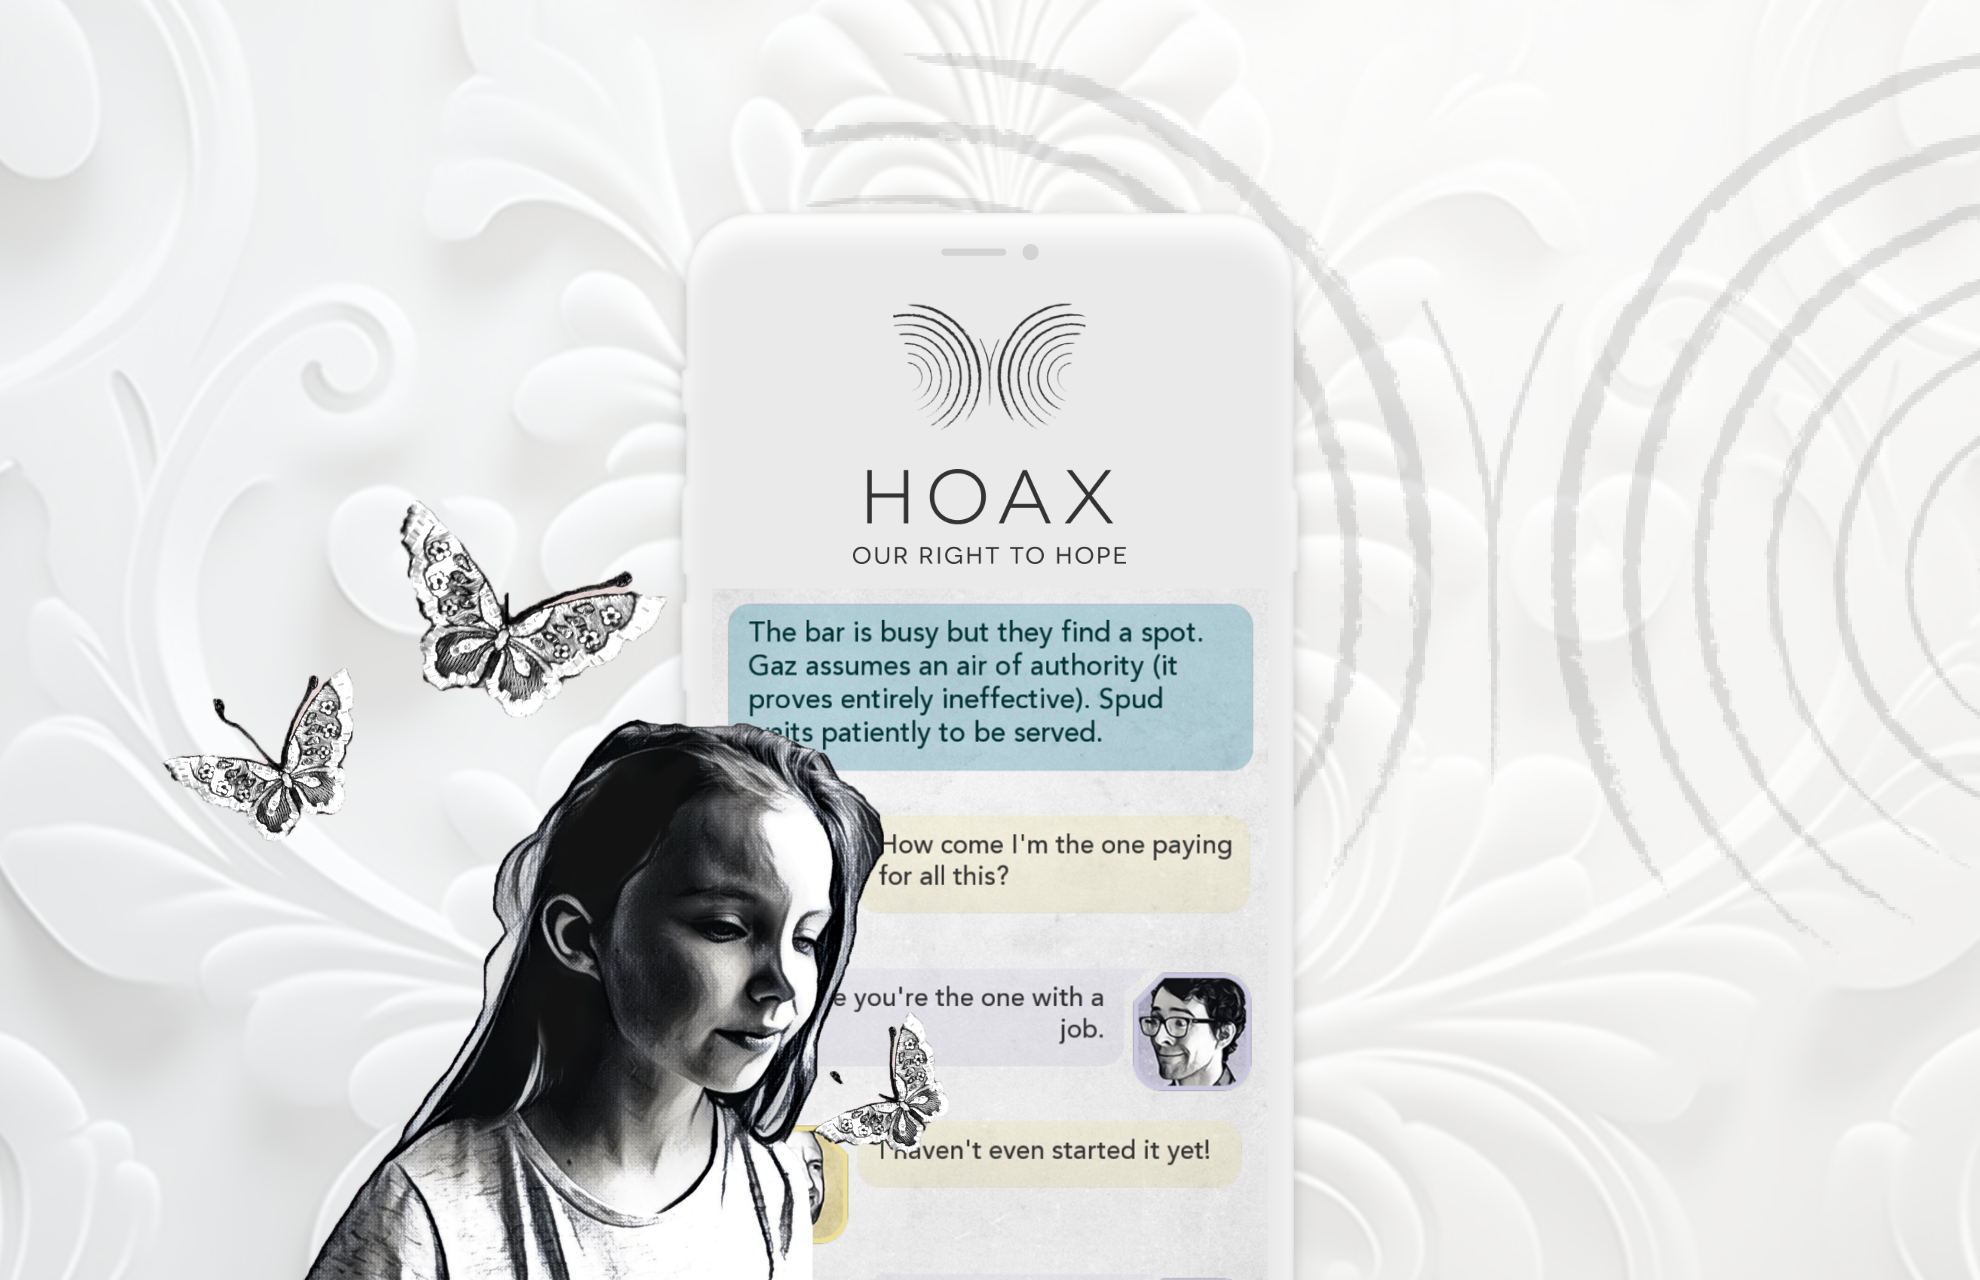 HOAX: Our right to hope